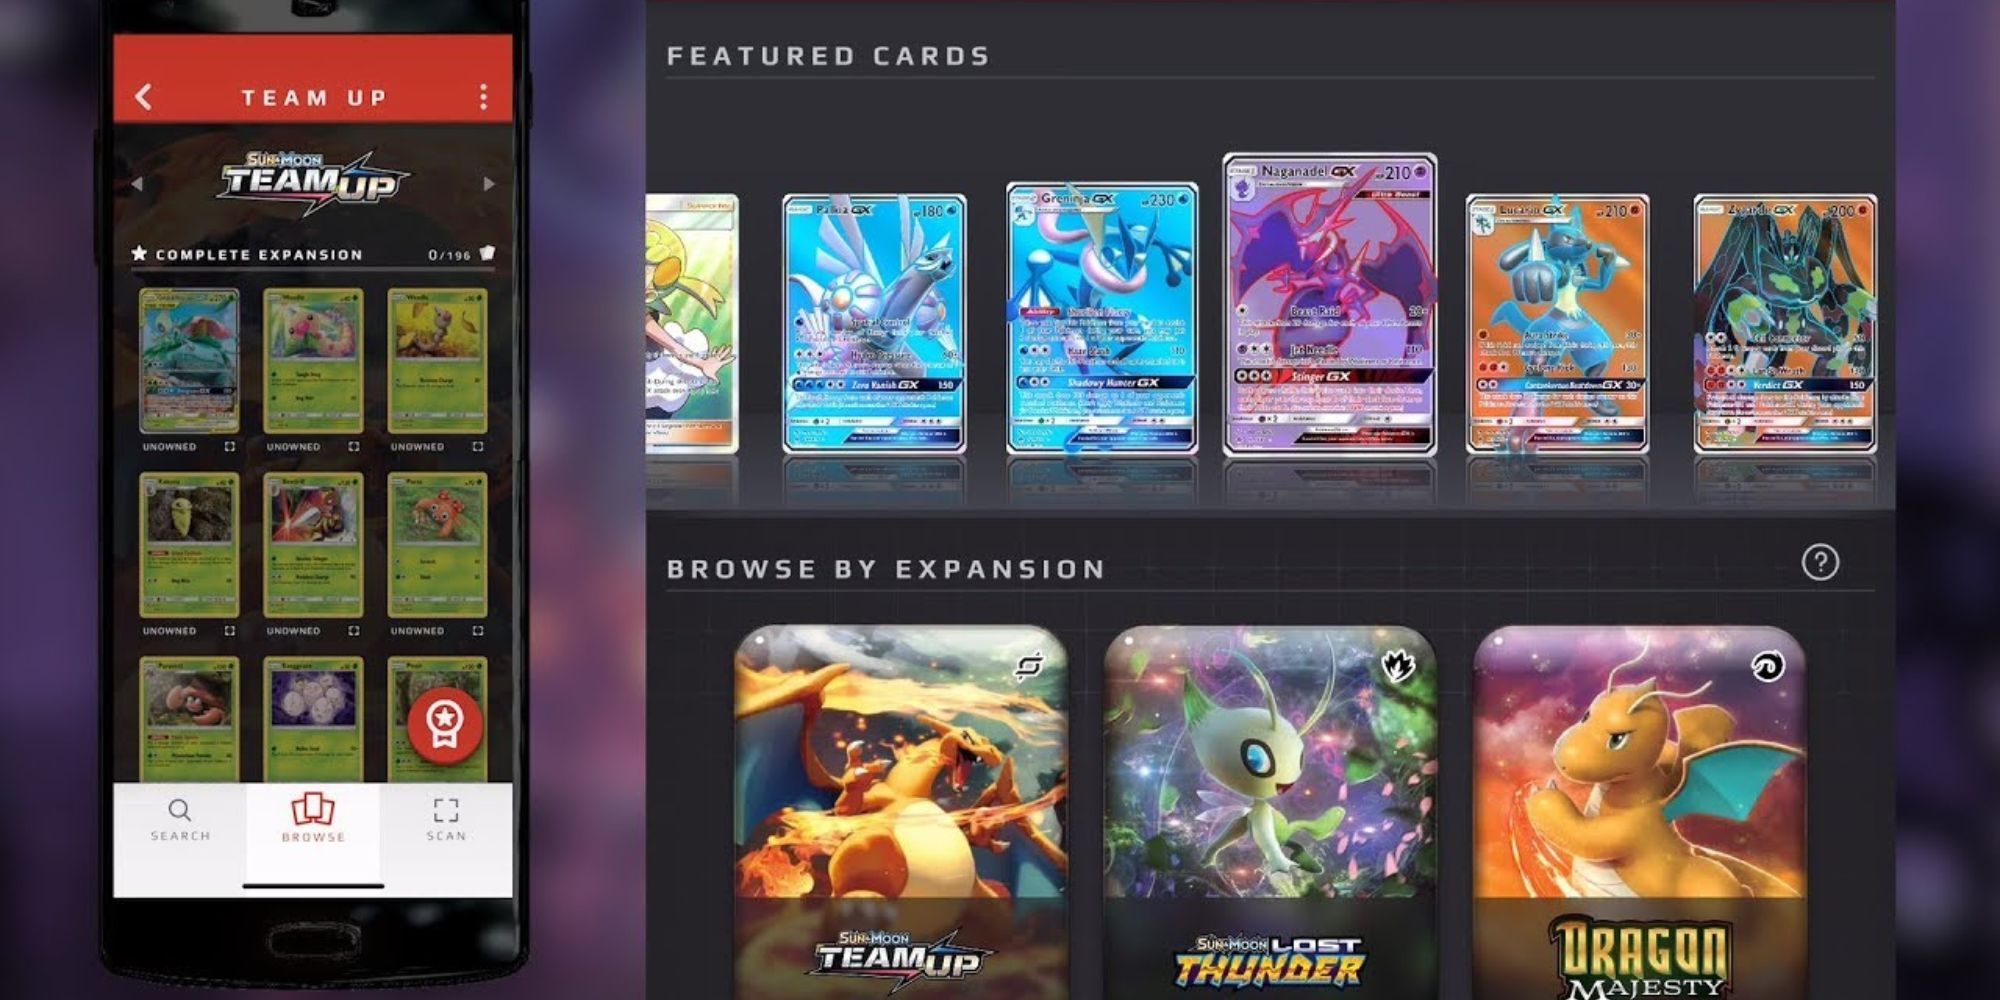 The main layout of the Pokemon TCG Card Dex